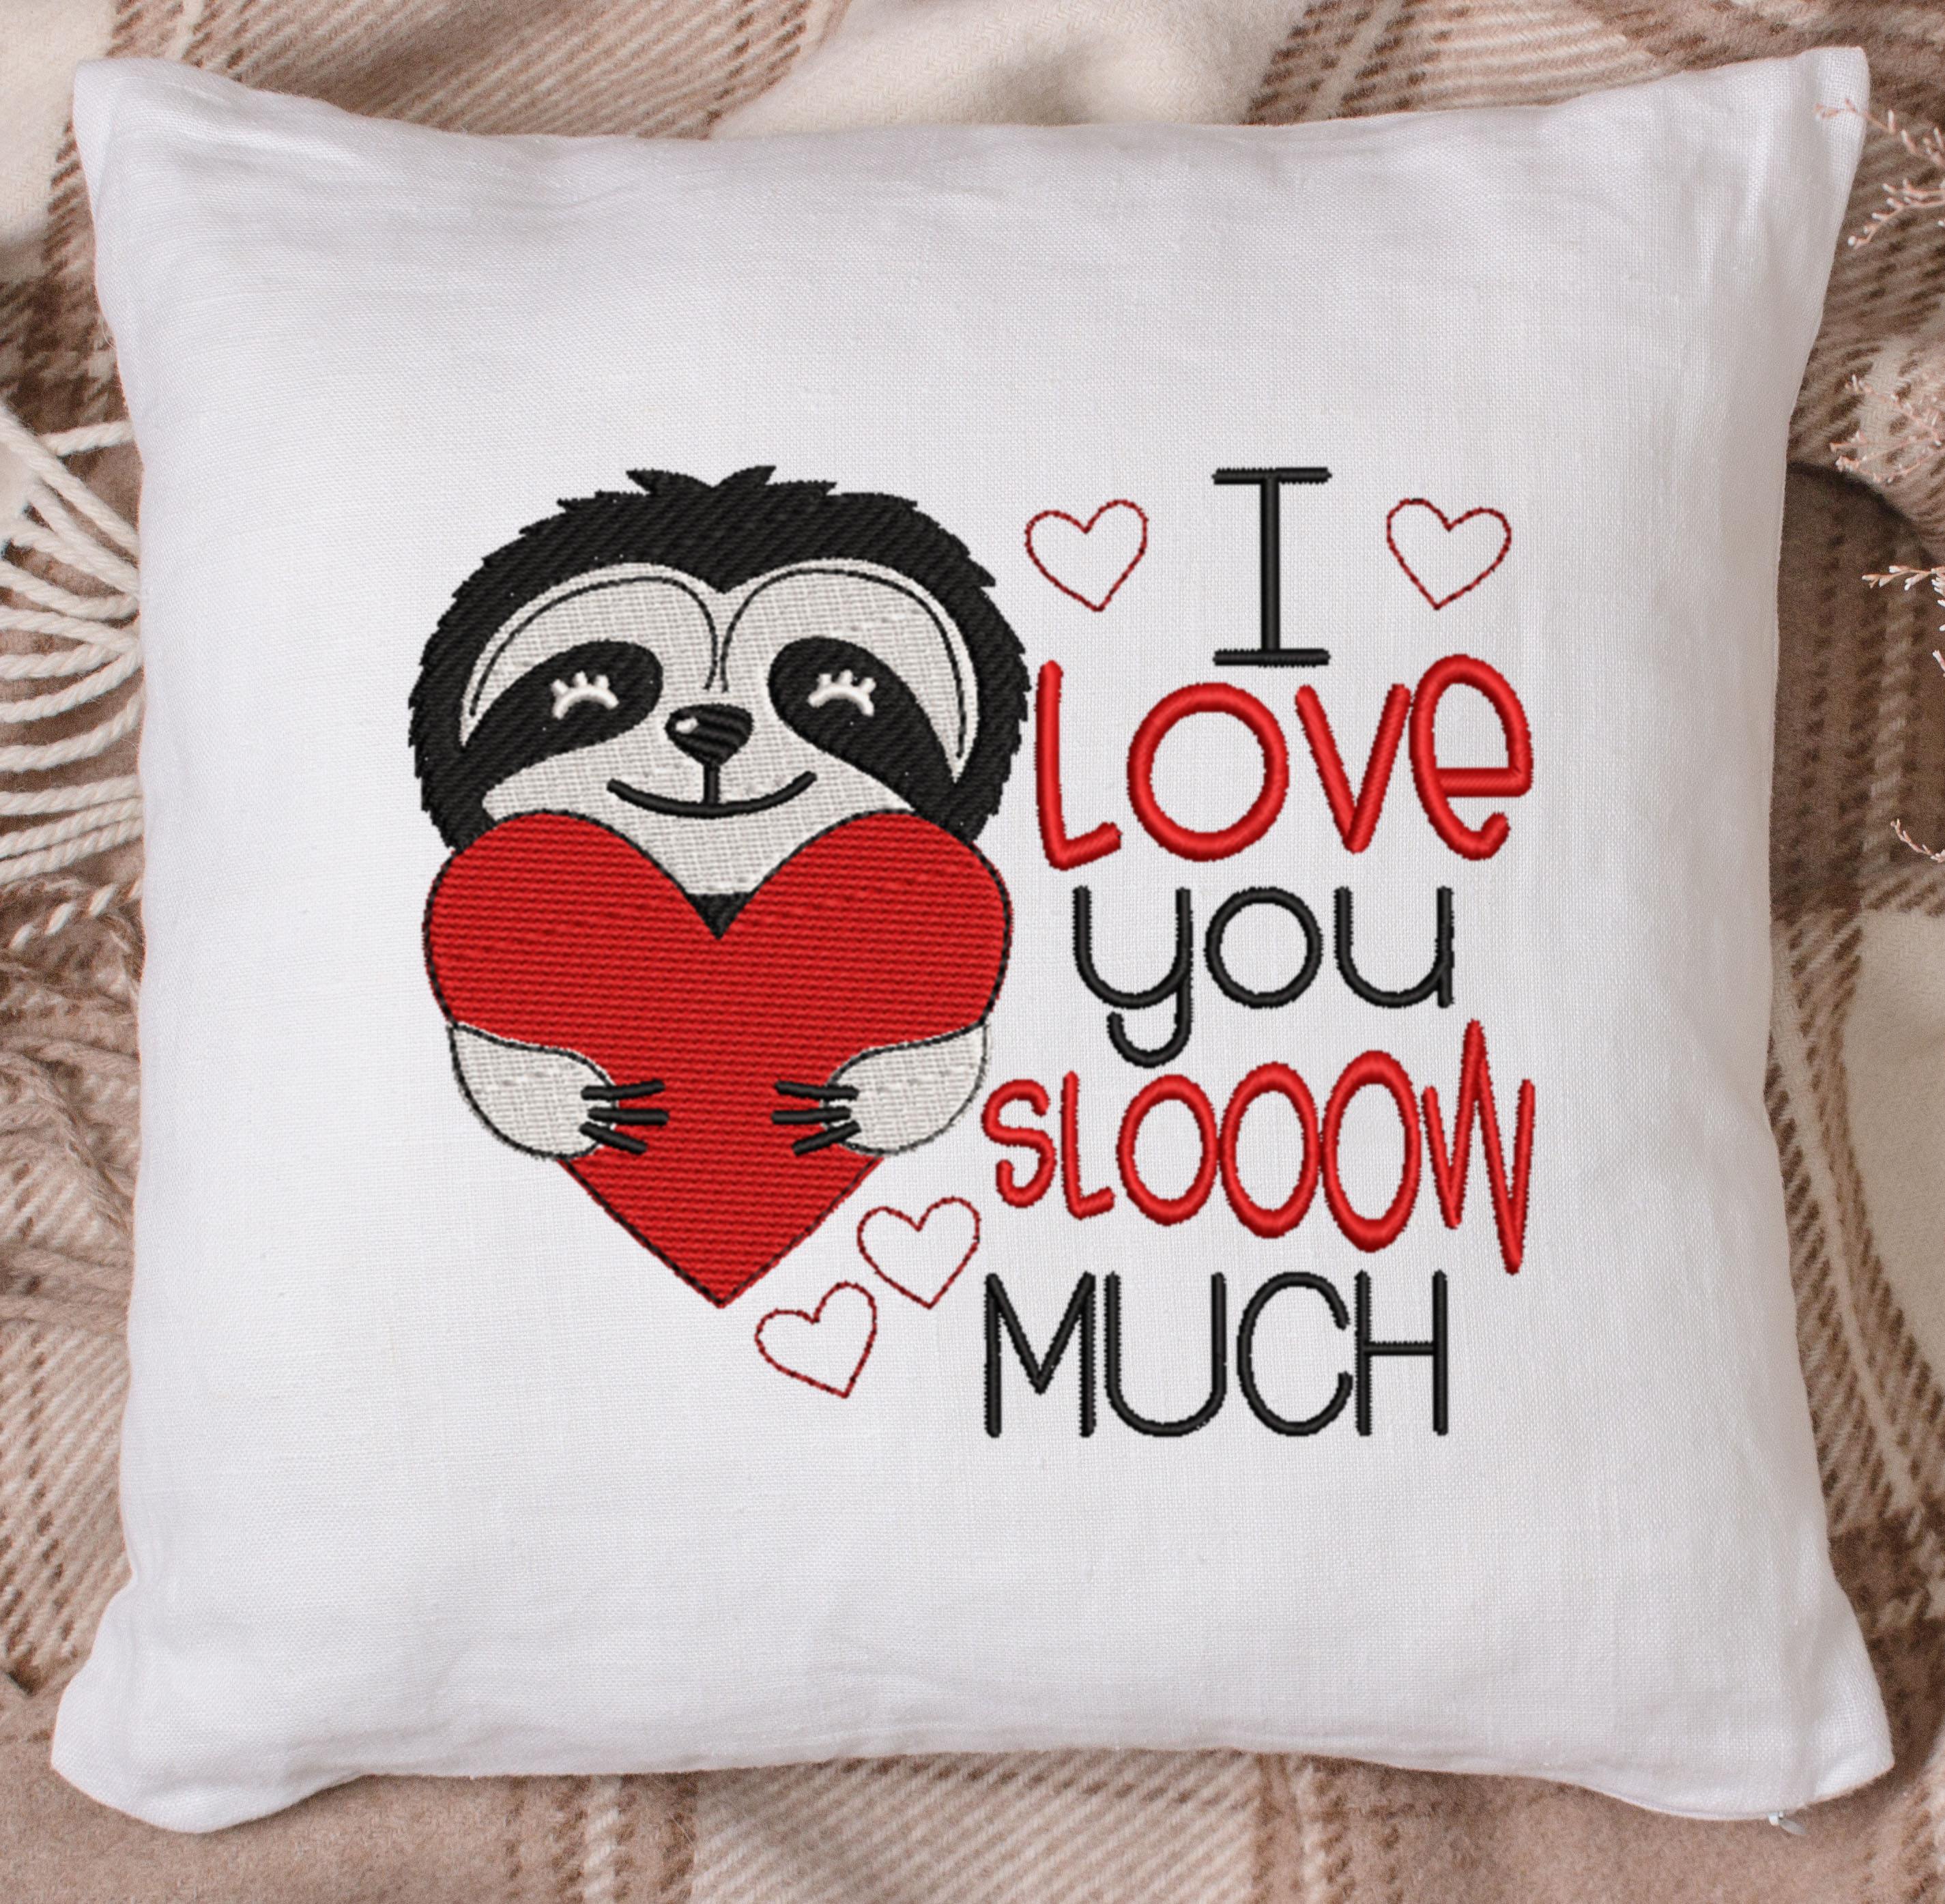 Love You Slooow Much 2020 Embroidery Design - Oh My Crafty Supplies Inc.